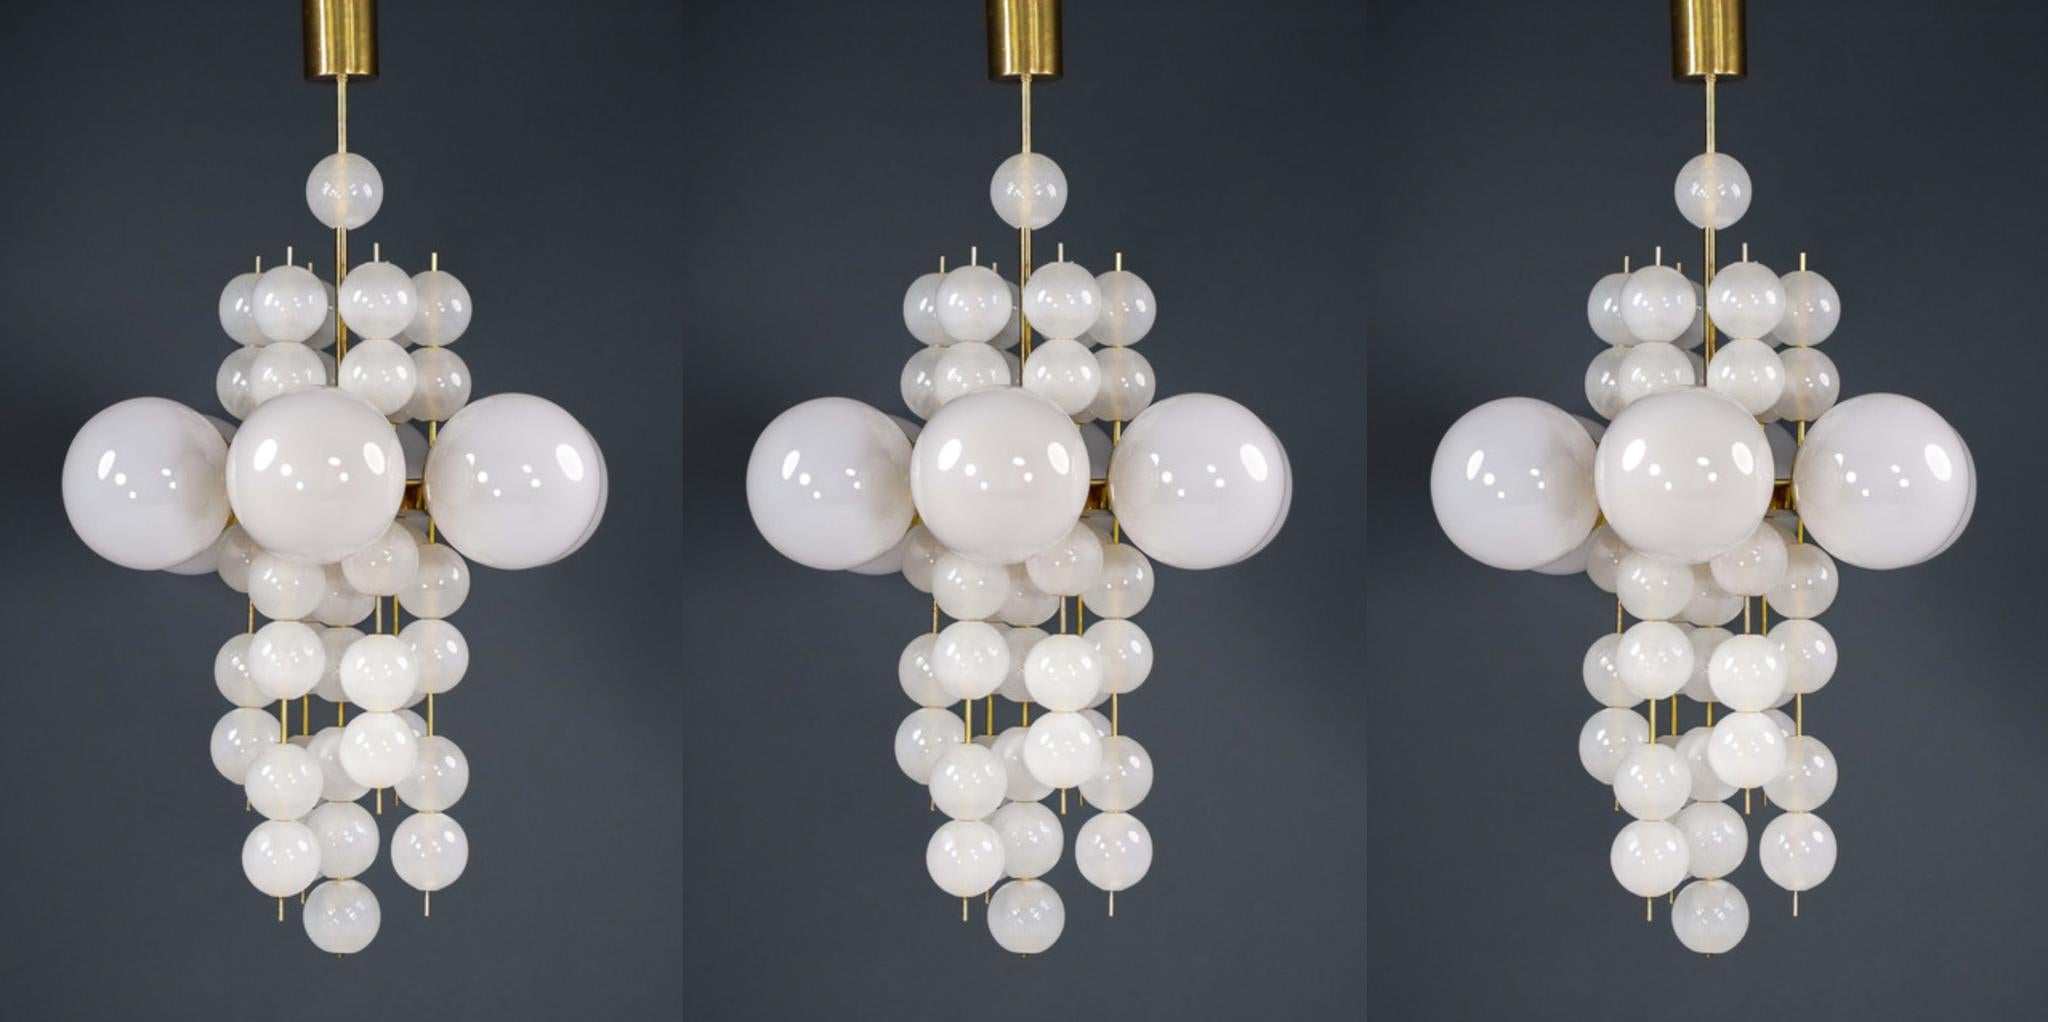 Set of 3 XL hotel chandeliers with brass fixture and hand-blowed frosted glass globes by Preciosa, Czechia.

Large hotel chandelier with brass fixture produced and designed in Czechia by the famous Preciosa Factory. Total 6 large hand blowed frosted